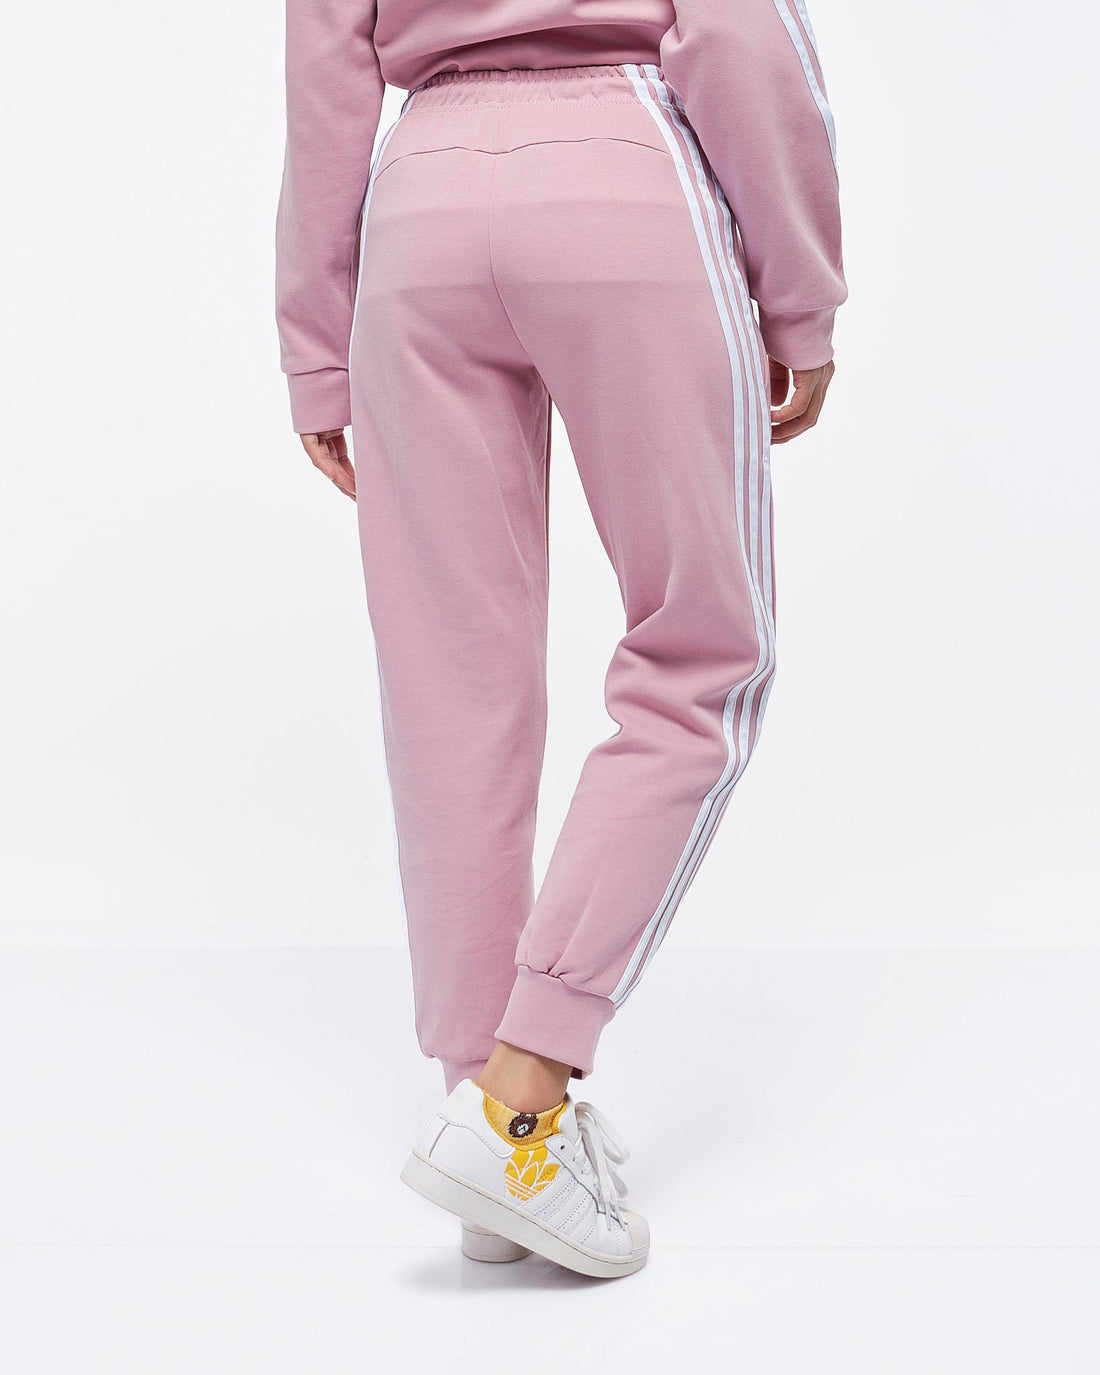 MOI OUTFIT-AD 3 Striped Unisex Jogger 22.90